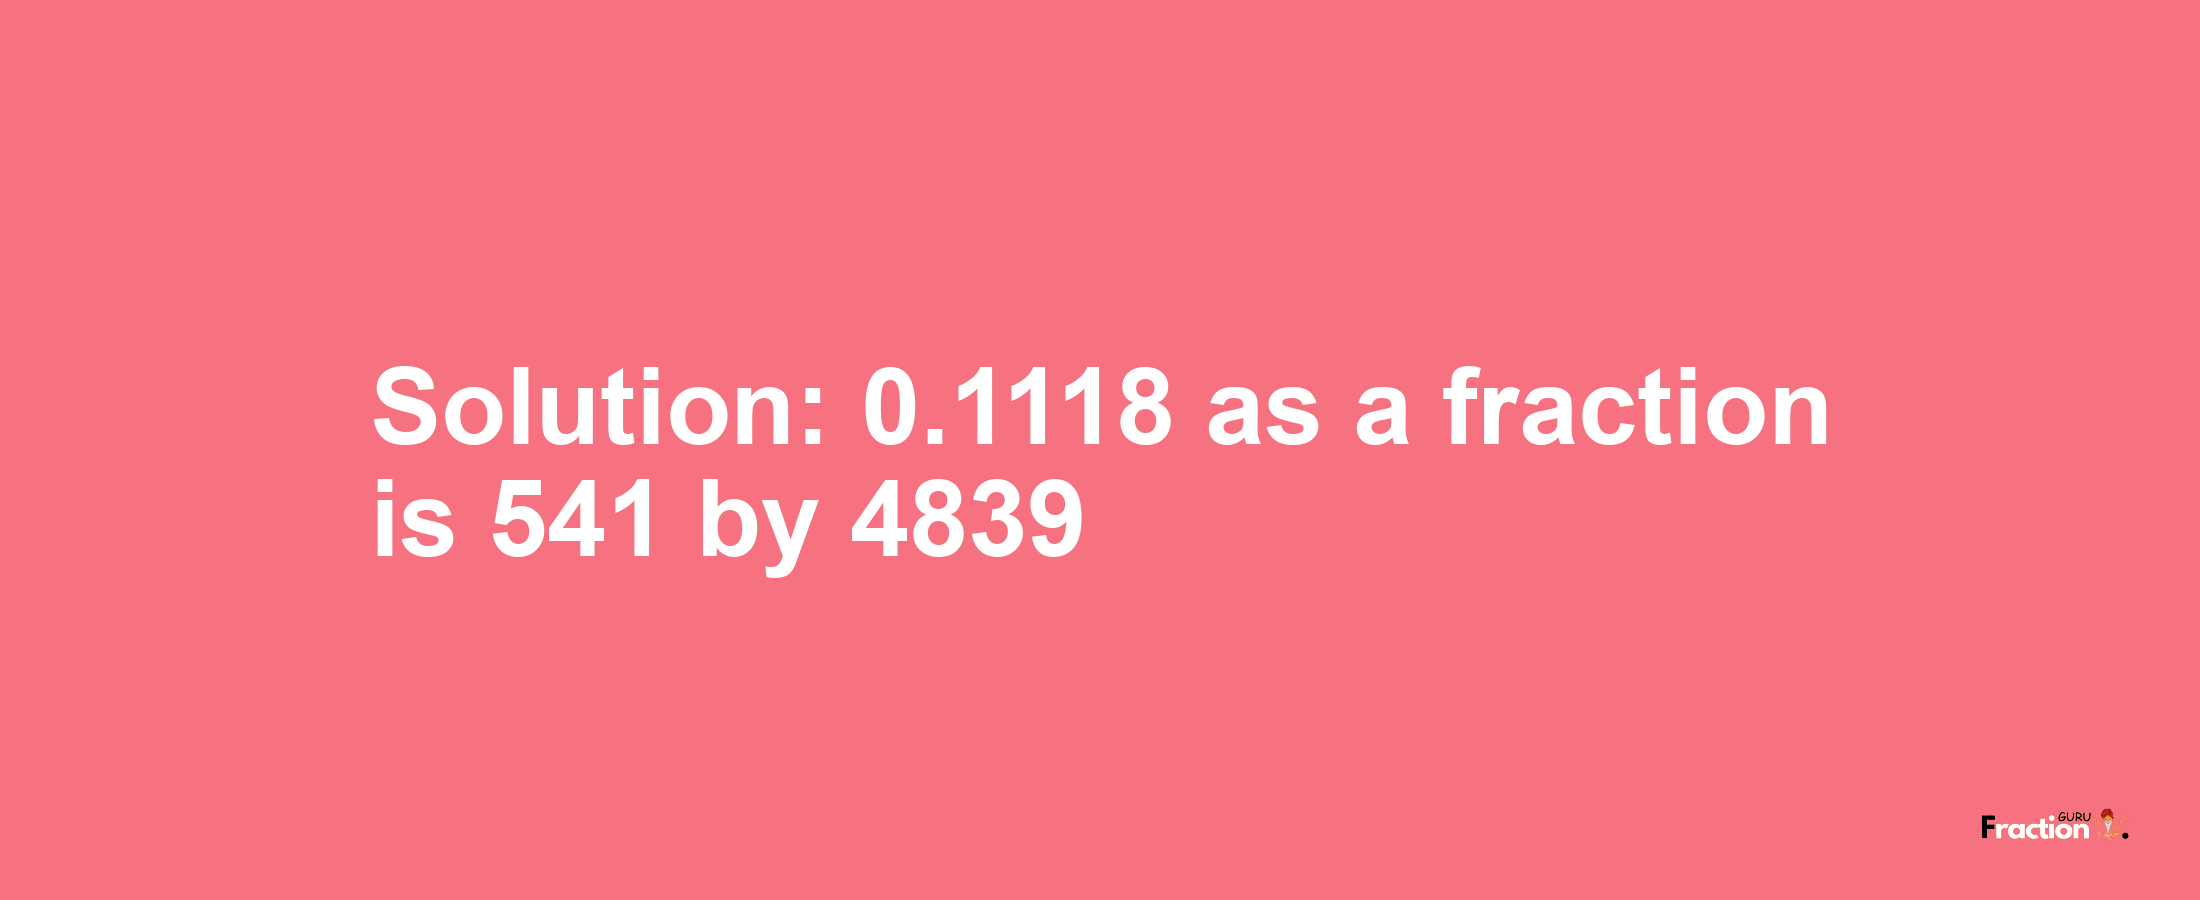 Solution:0.1118 as a fraction is 541/4839